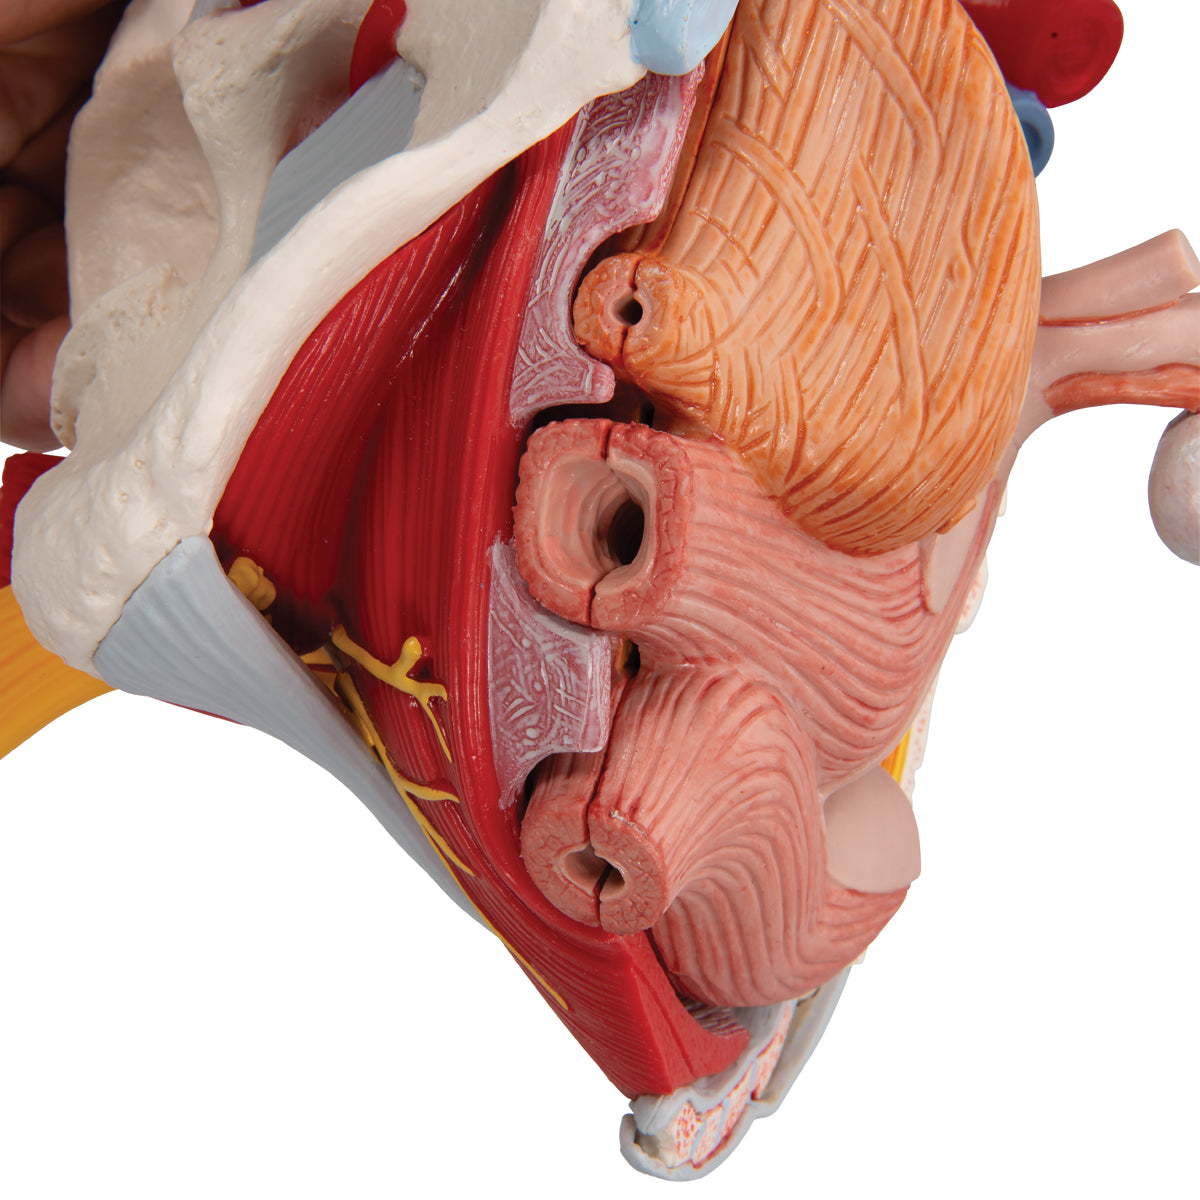 Pelvic model showing the pelvic floor, genitals, ligaments, nerves and blood vessels in the woman